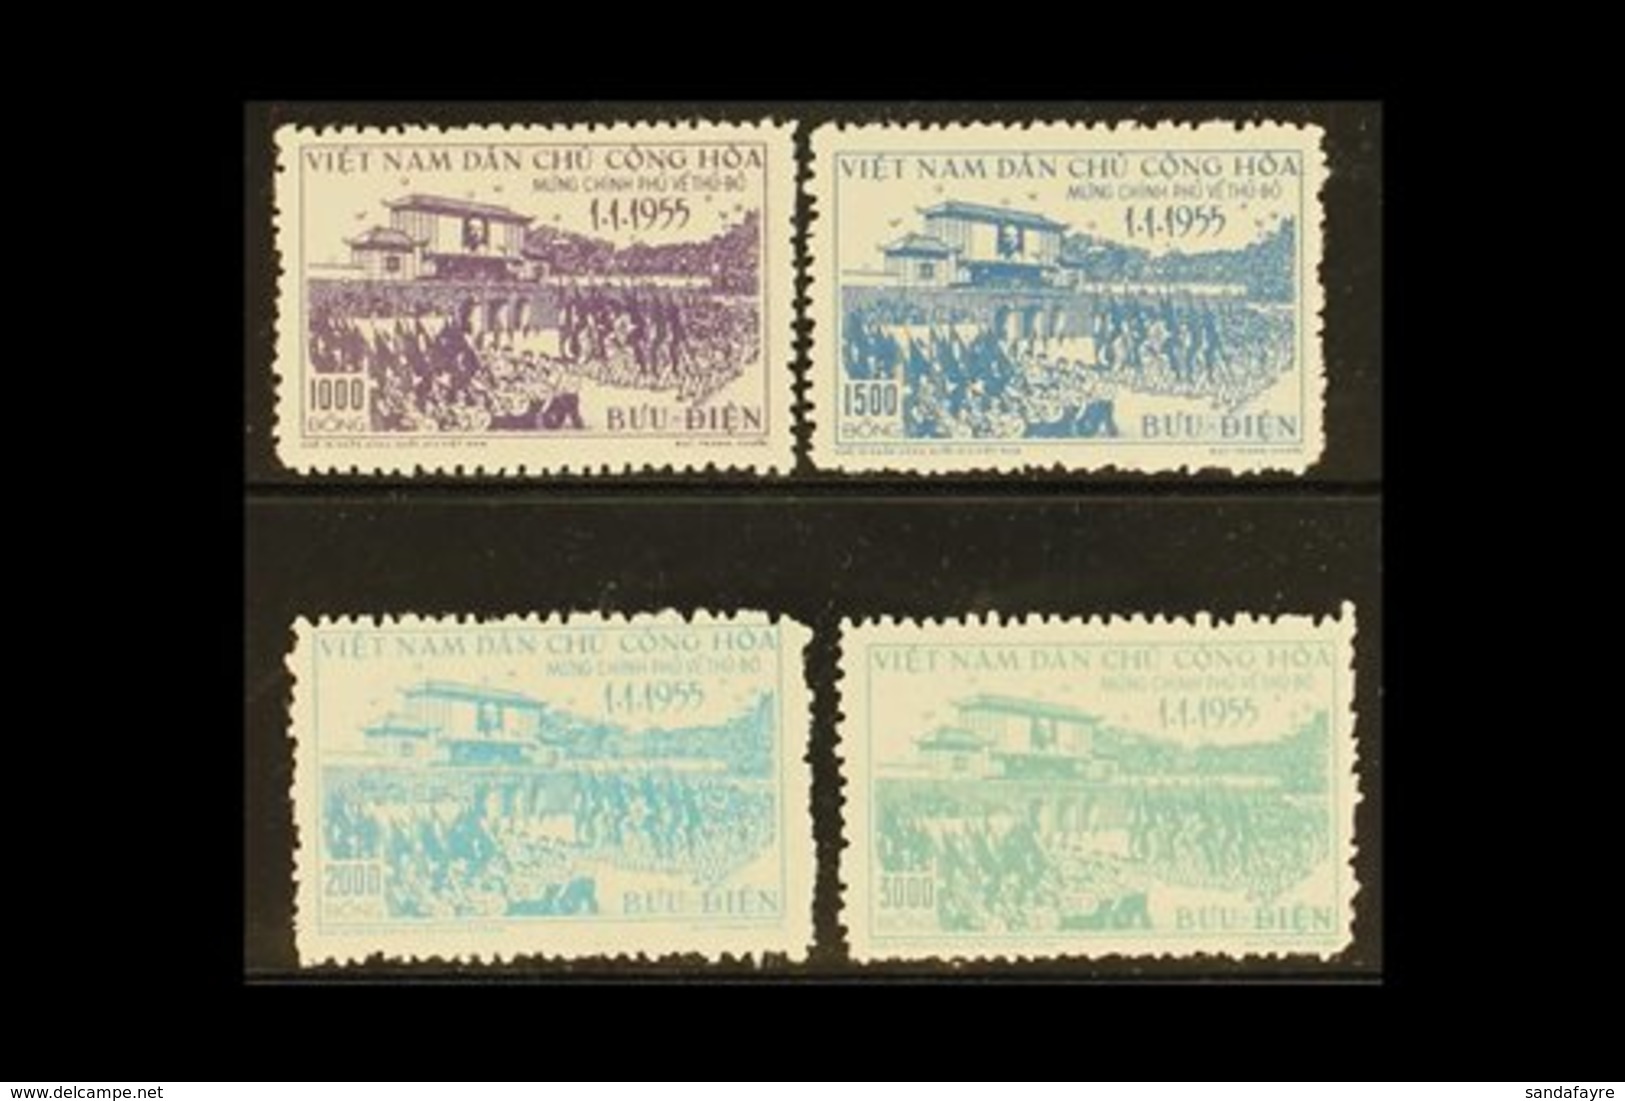 1956 Return Of Government To Hanoi, Complete Set. SG N42/45, Scott 28/31, Very Fine Unused, No Gum As Issued And Free Fr - Vietnam